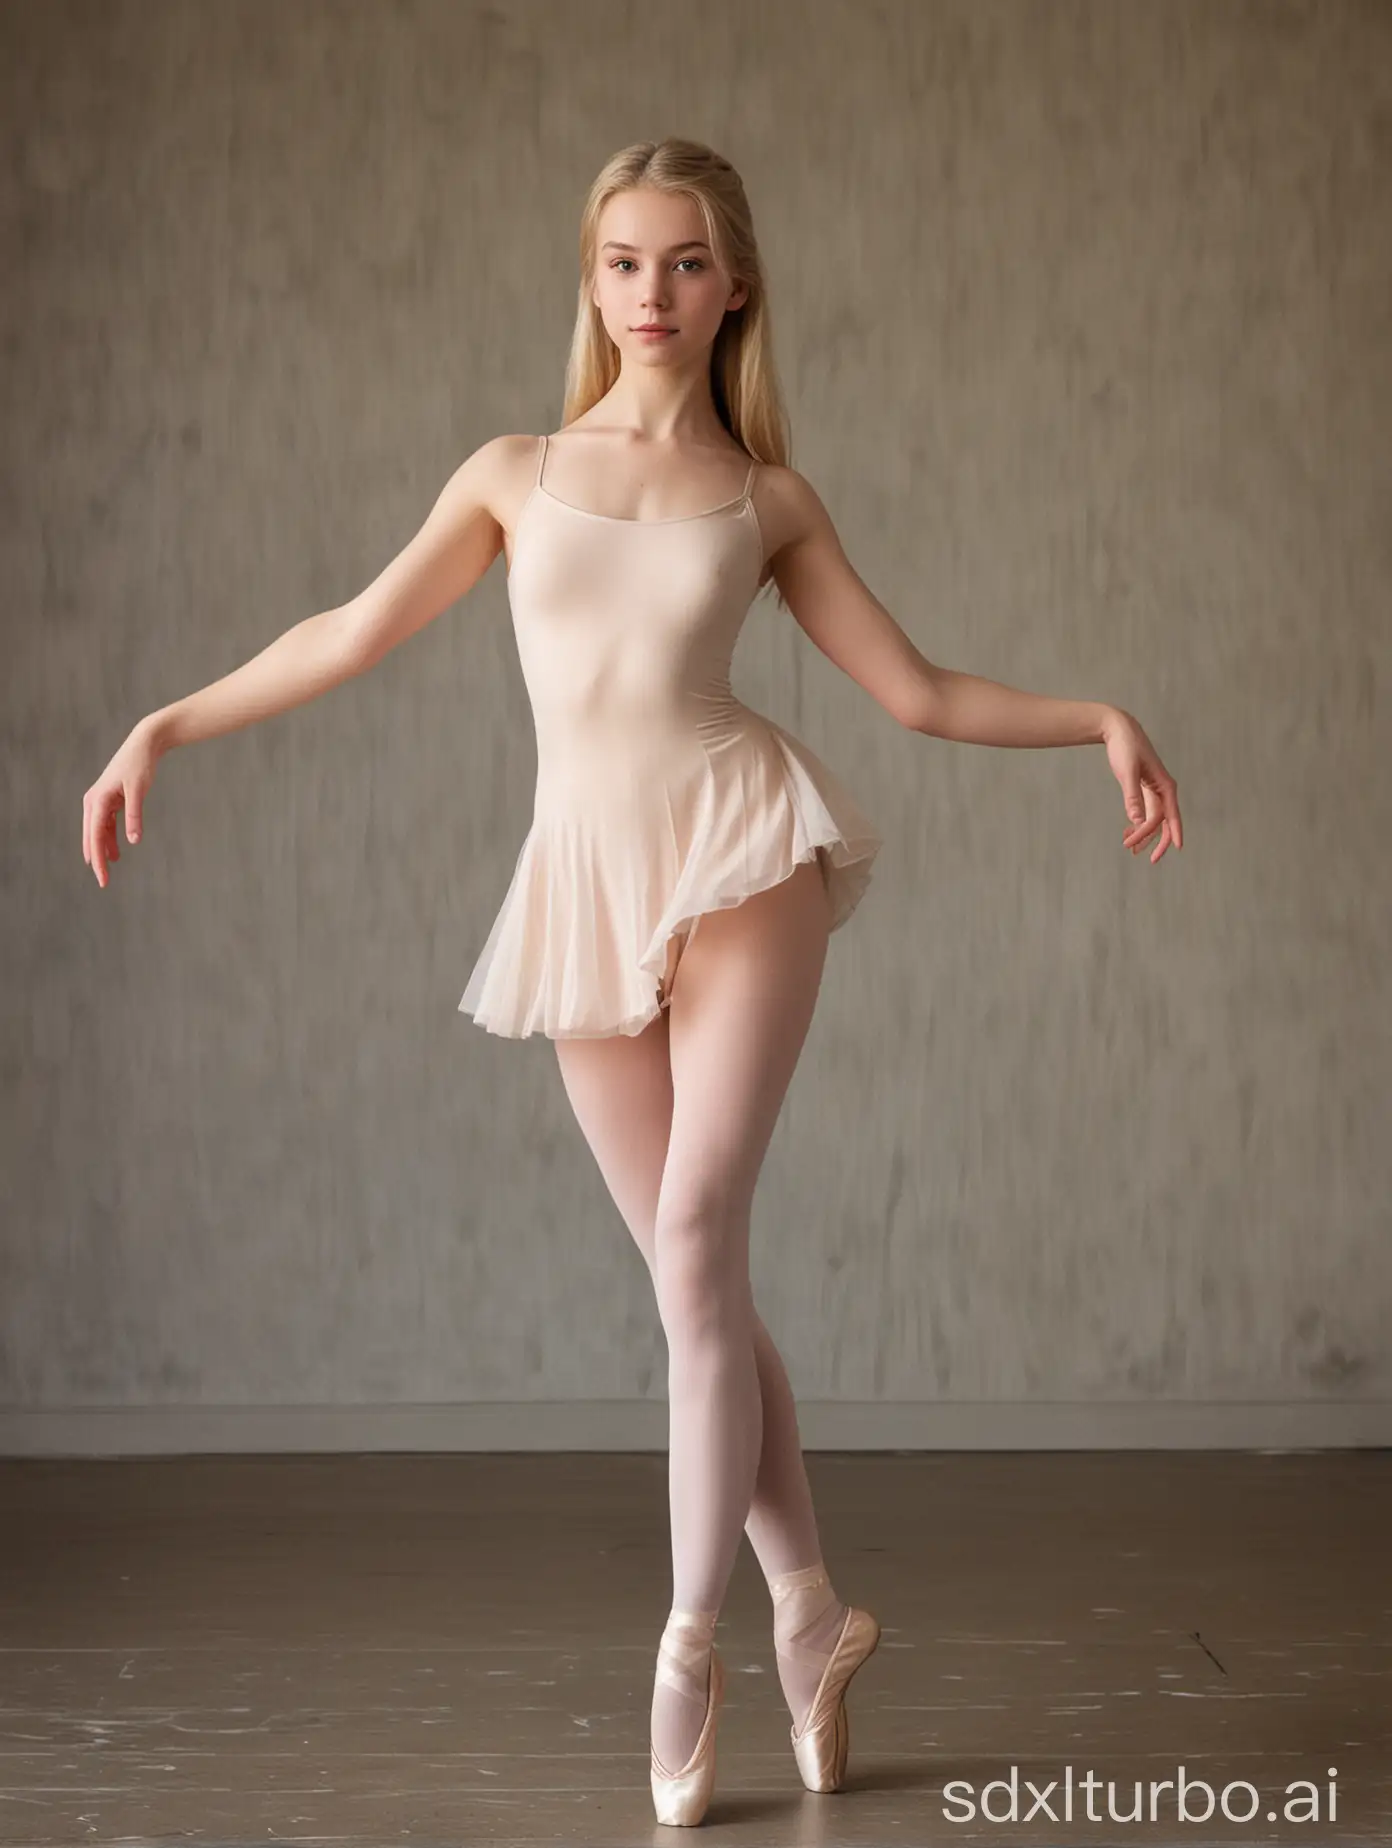 18 years old nude blonde slim beauty with medium long hair as classical ballet dancer